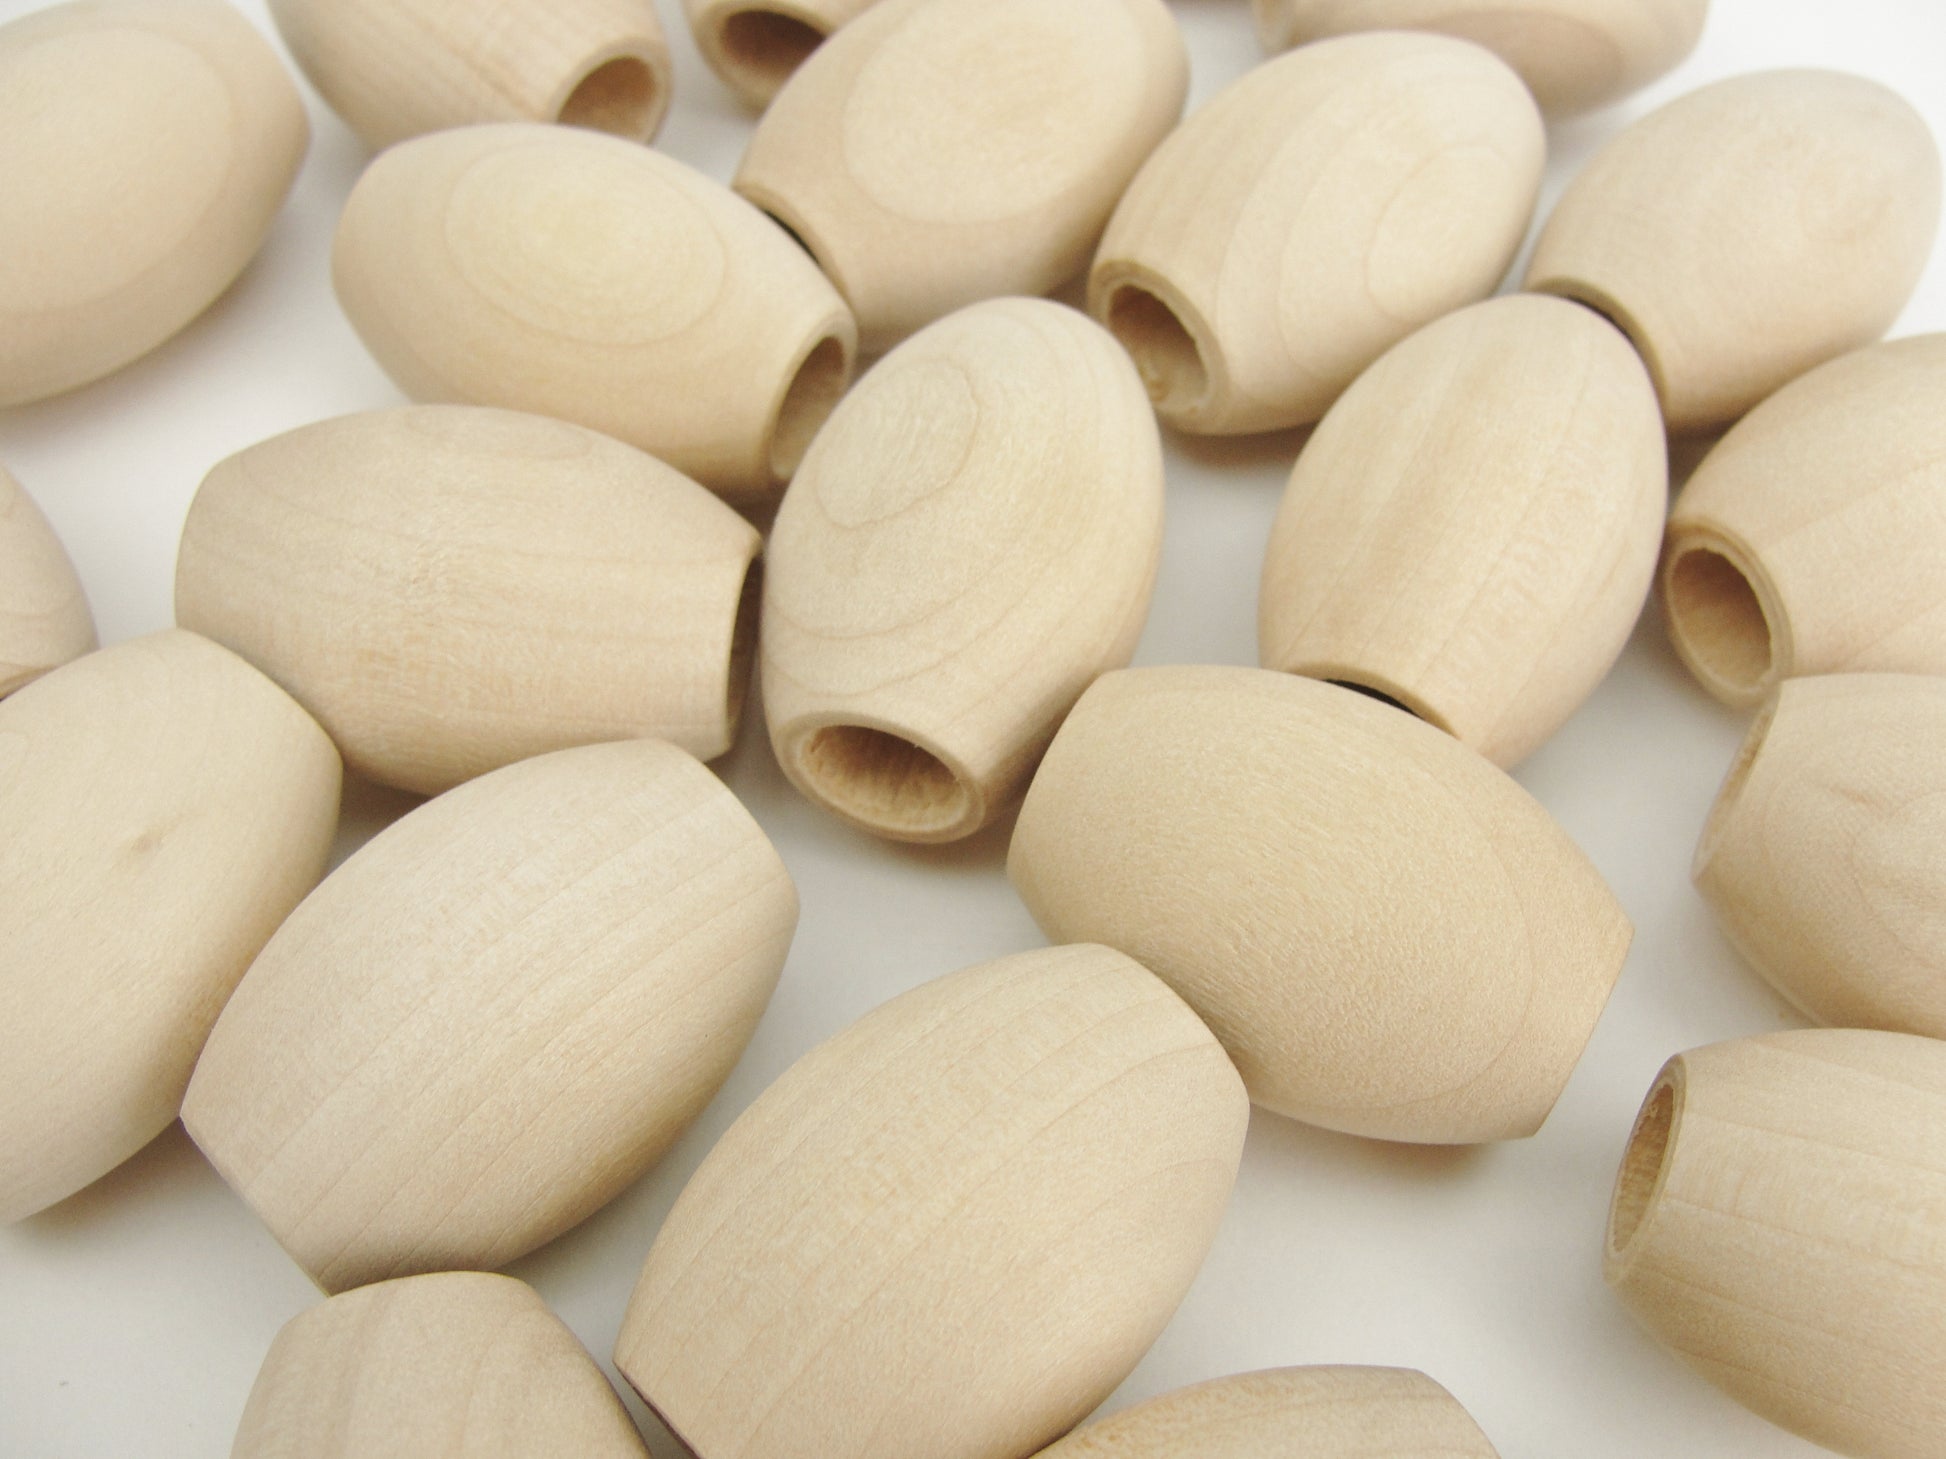 Wooden oval beads 1 1/4" x 7/8" with a 3/8" hole - Wood parts - Craft Supply House